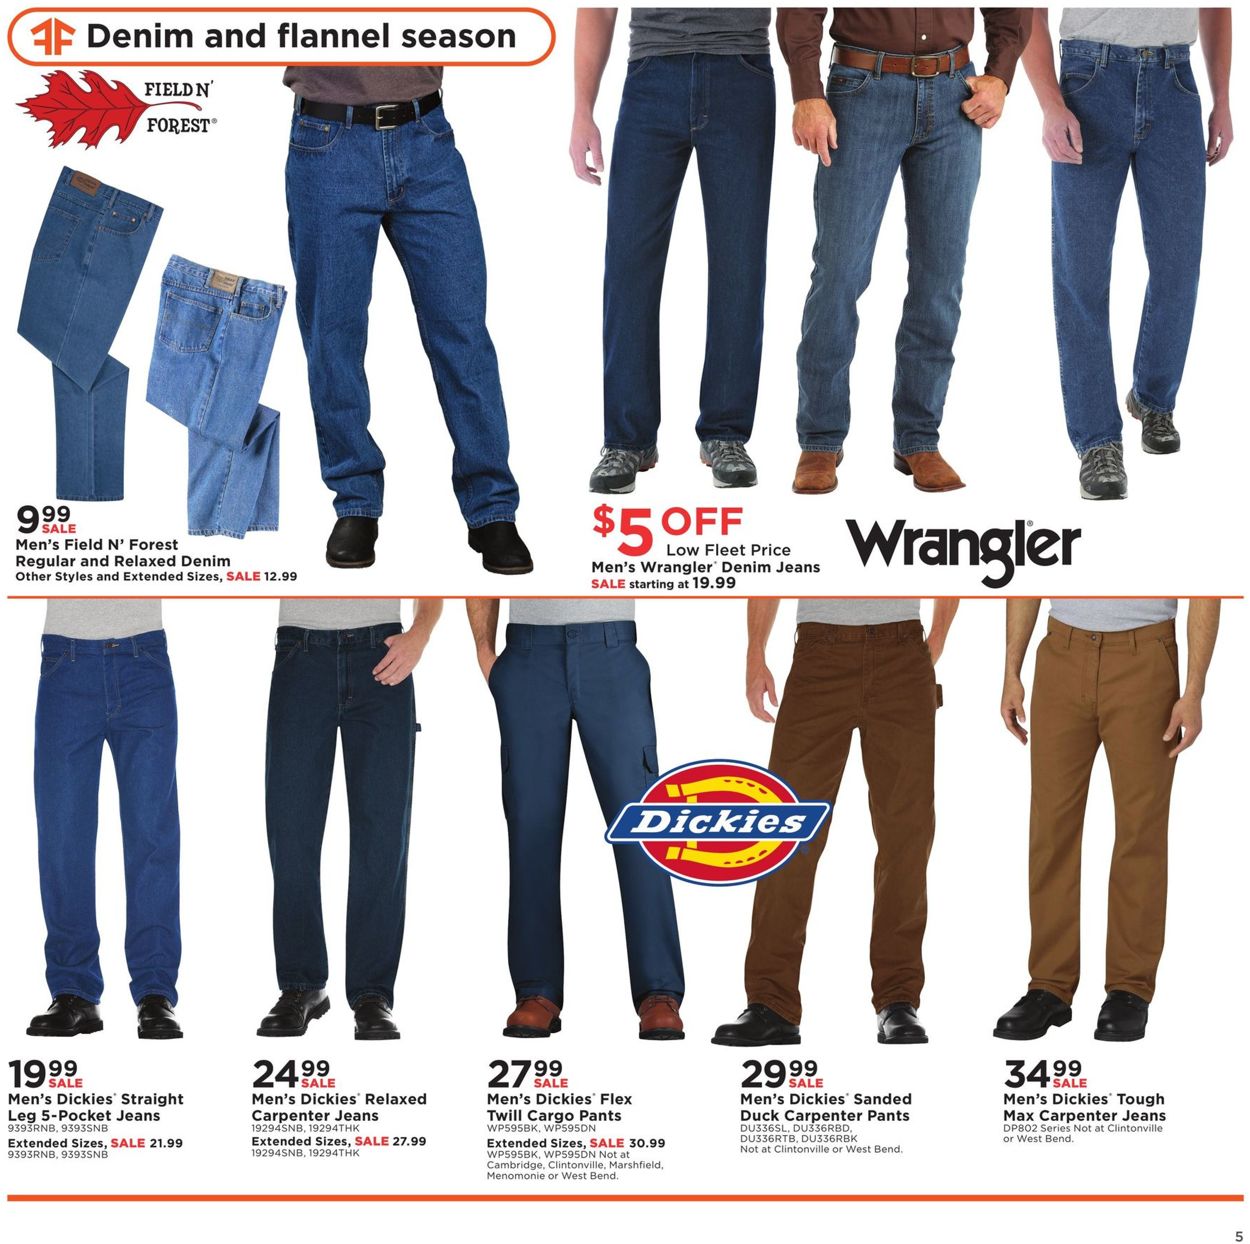 Mills Fleet Farm Current weekly ad 10/04 - 10/12/2019 [5] - frequent ...